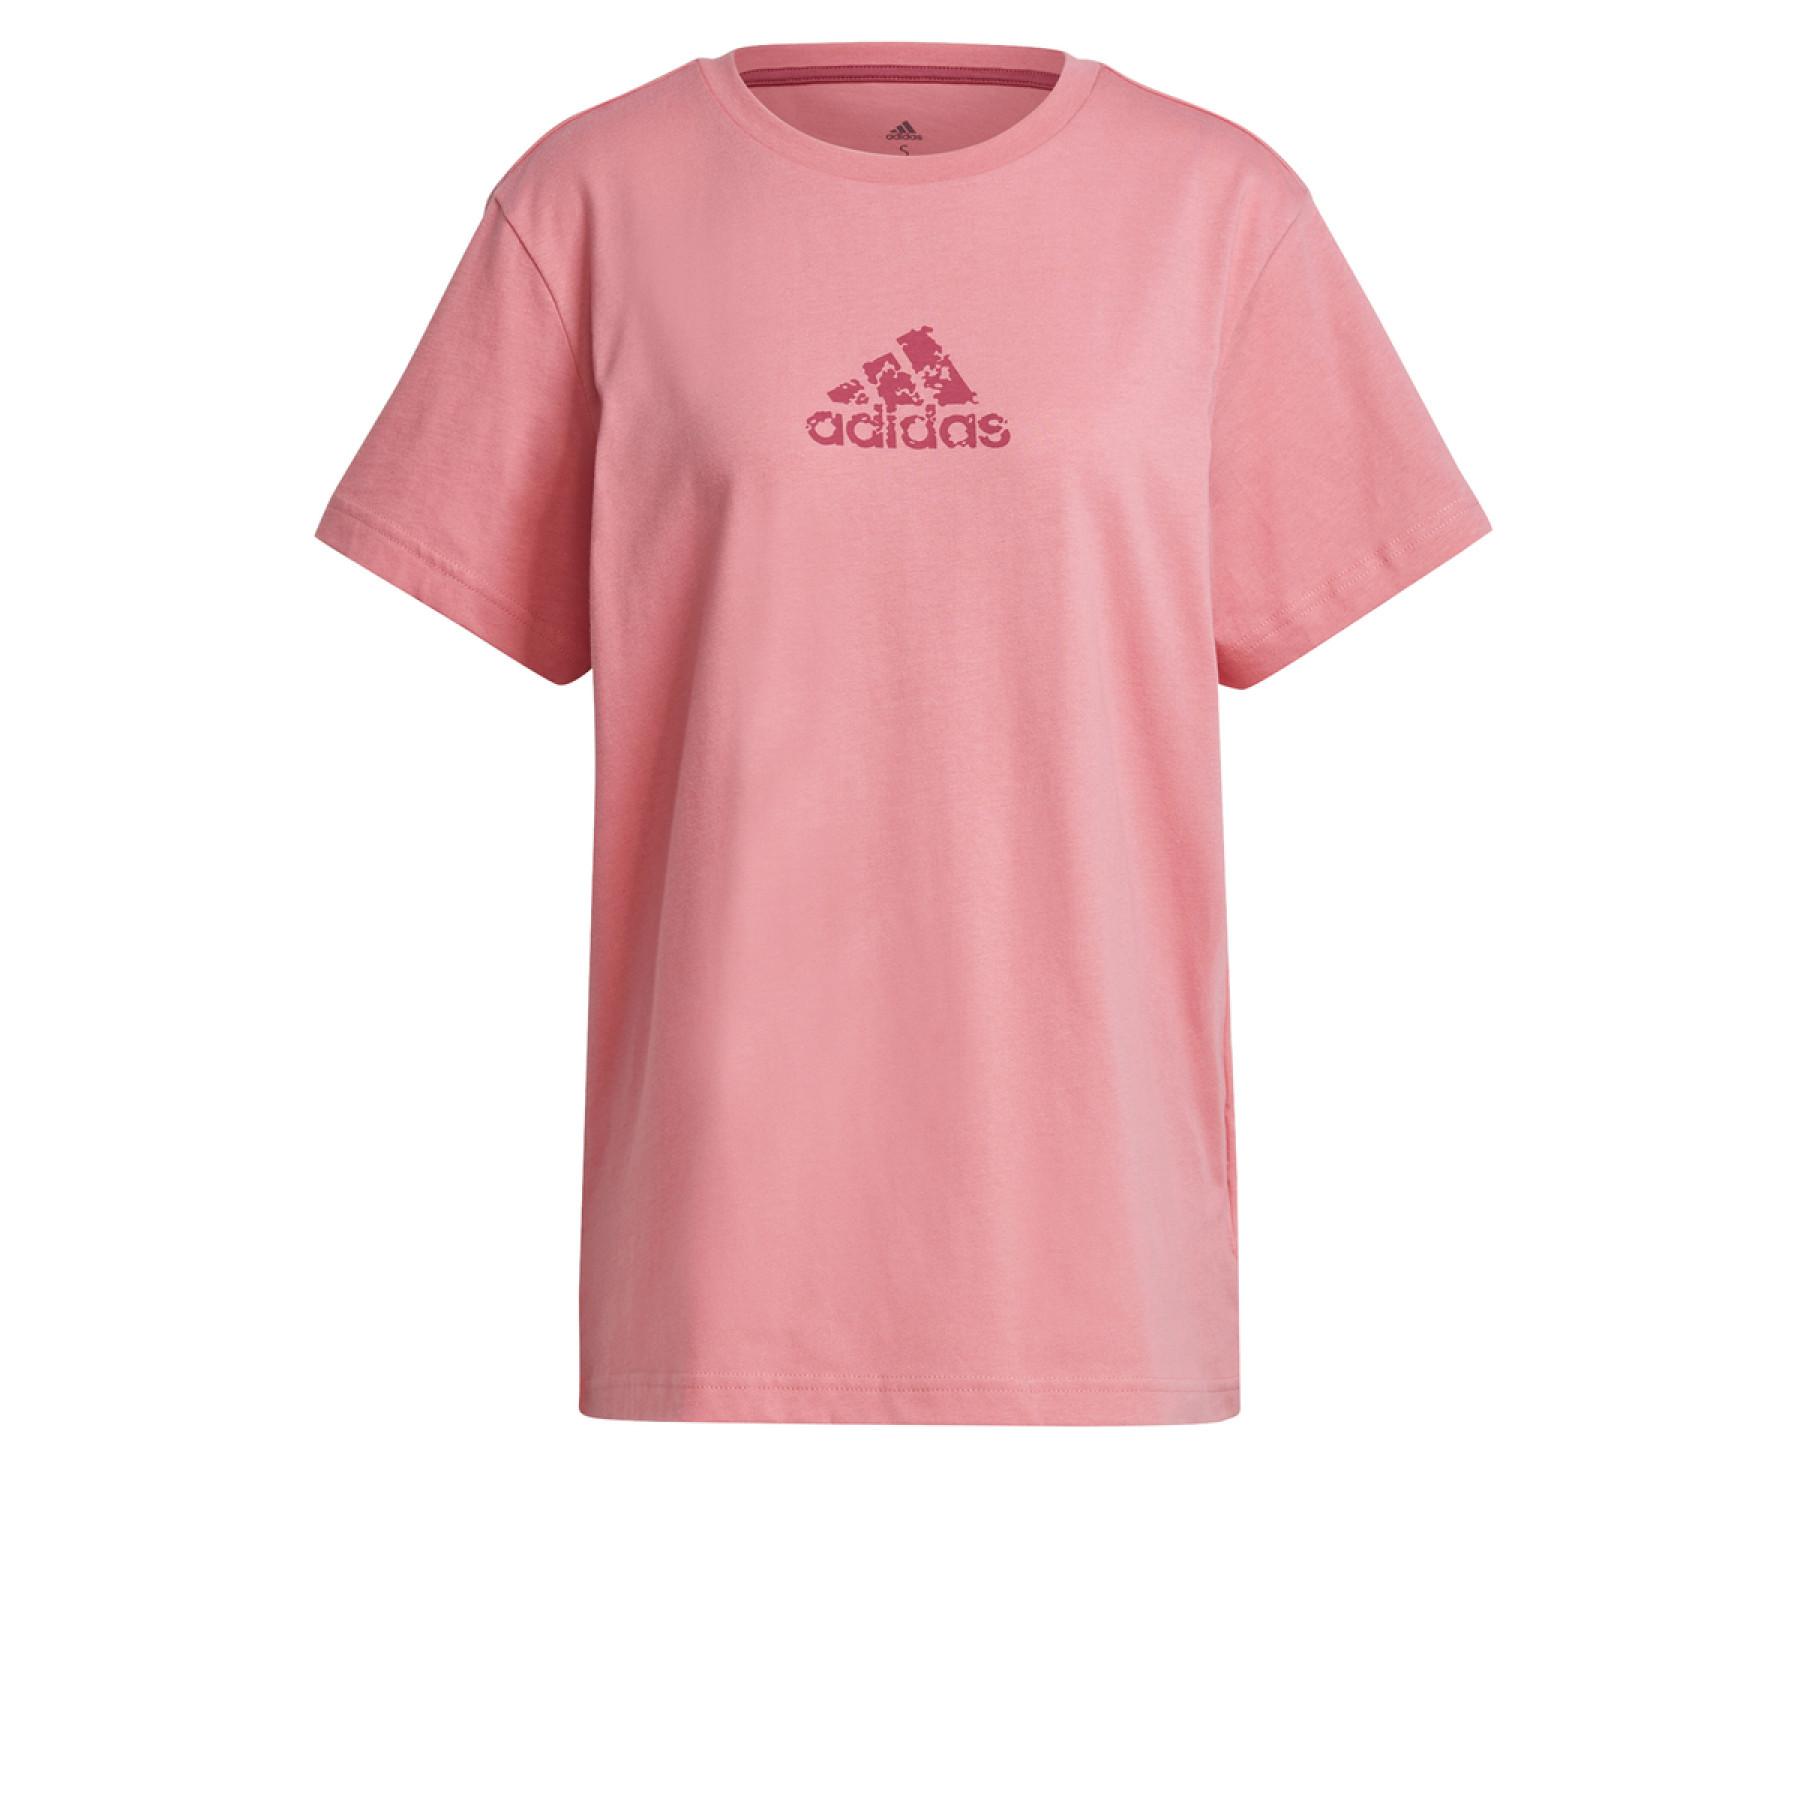 Made to remember Commemorative Arena Women's T-shirt adidas Badge of Sport Graphic